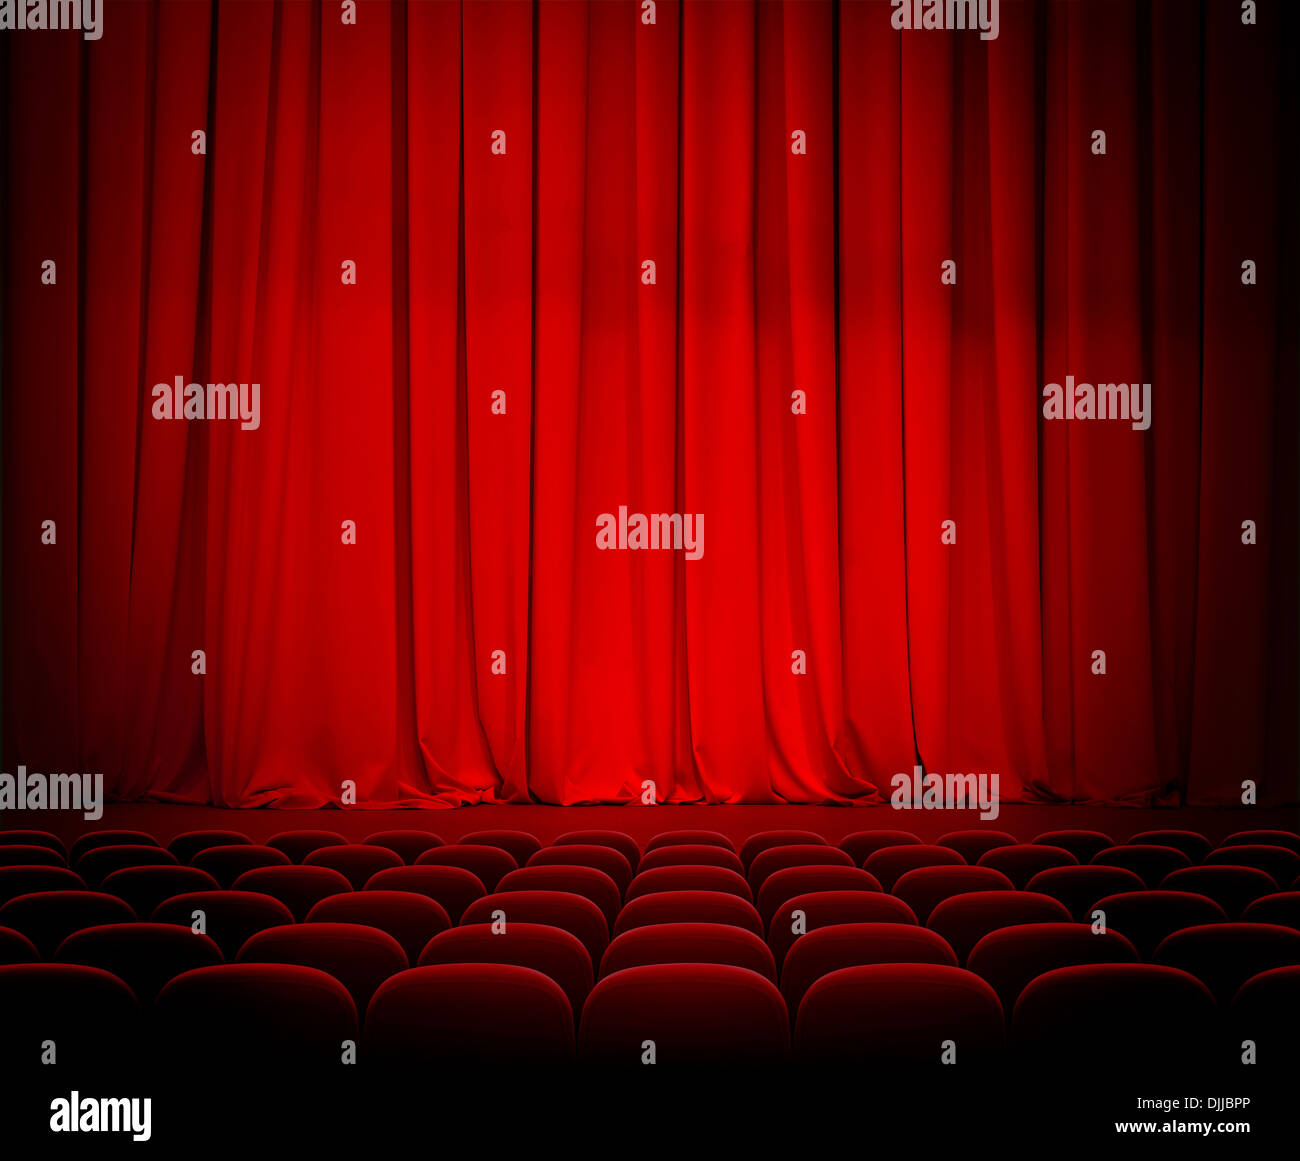 theater red curtains and seats Stock Photo